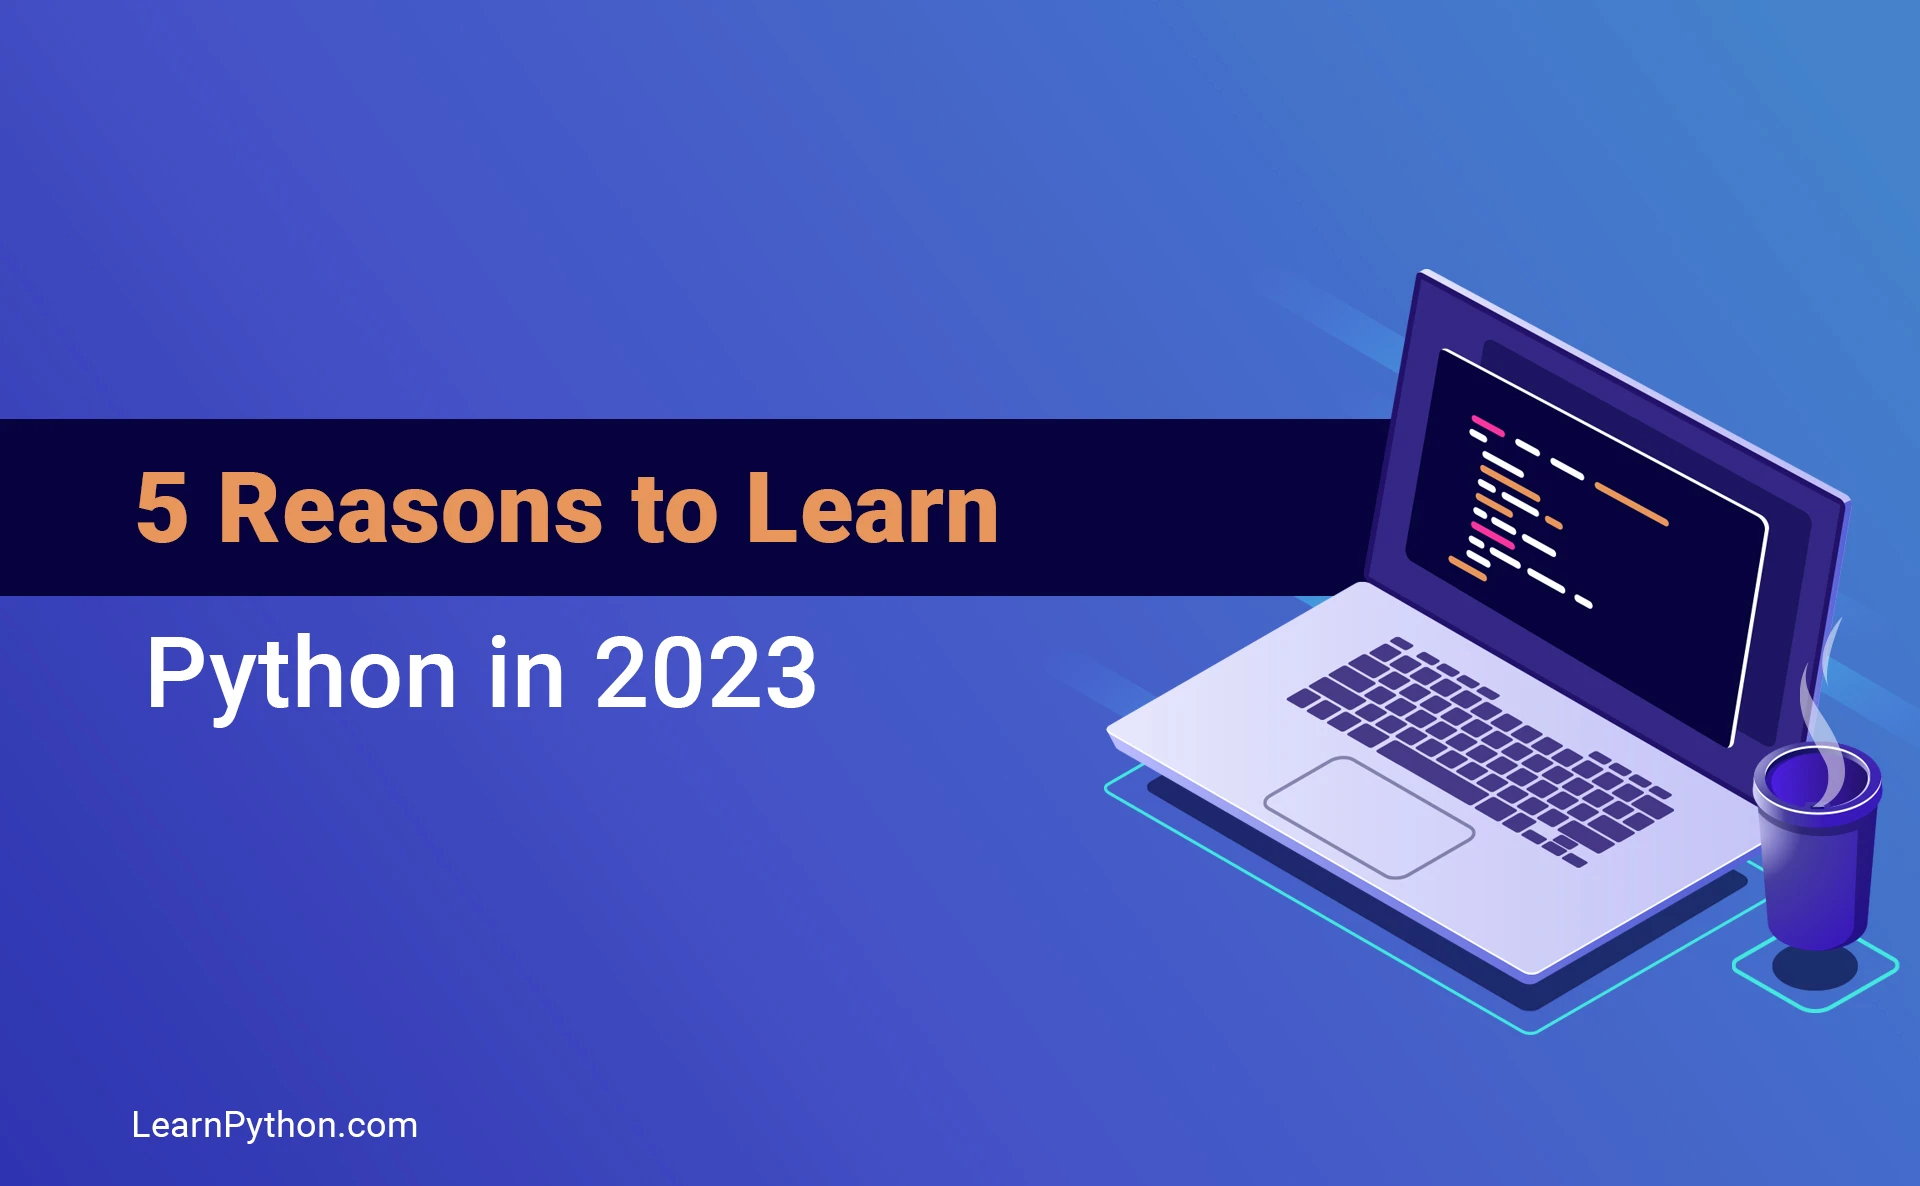 5 Reasons to Learn Python in 2023